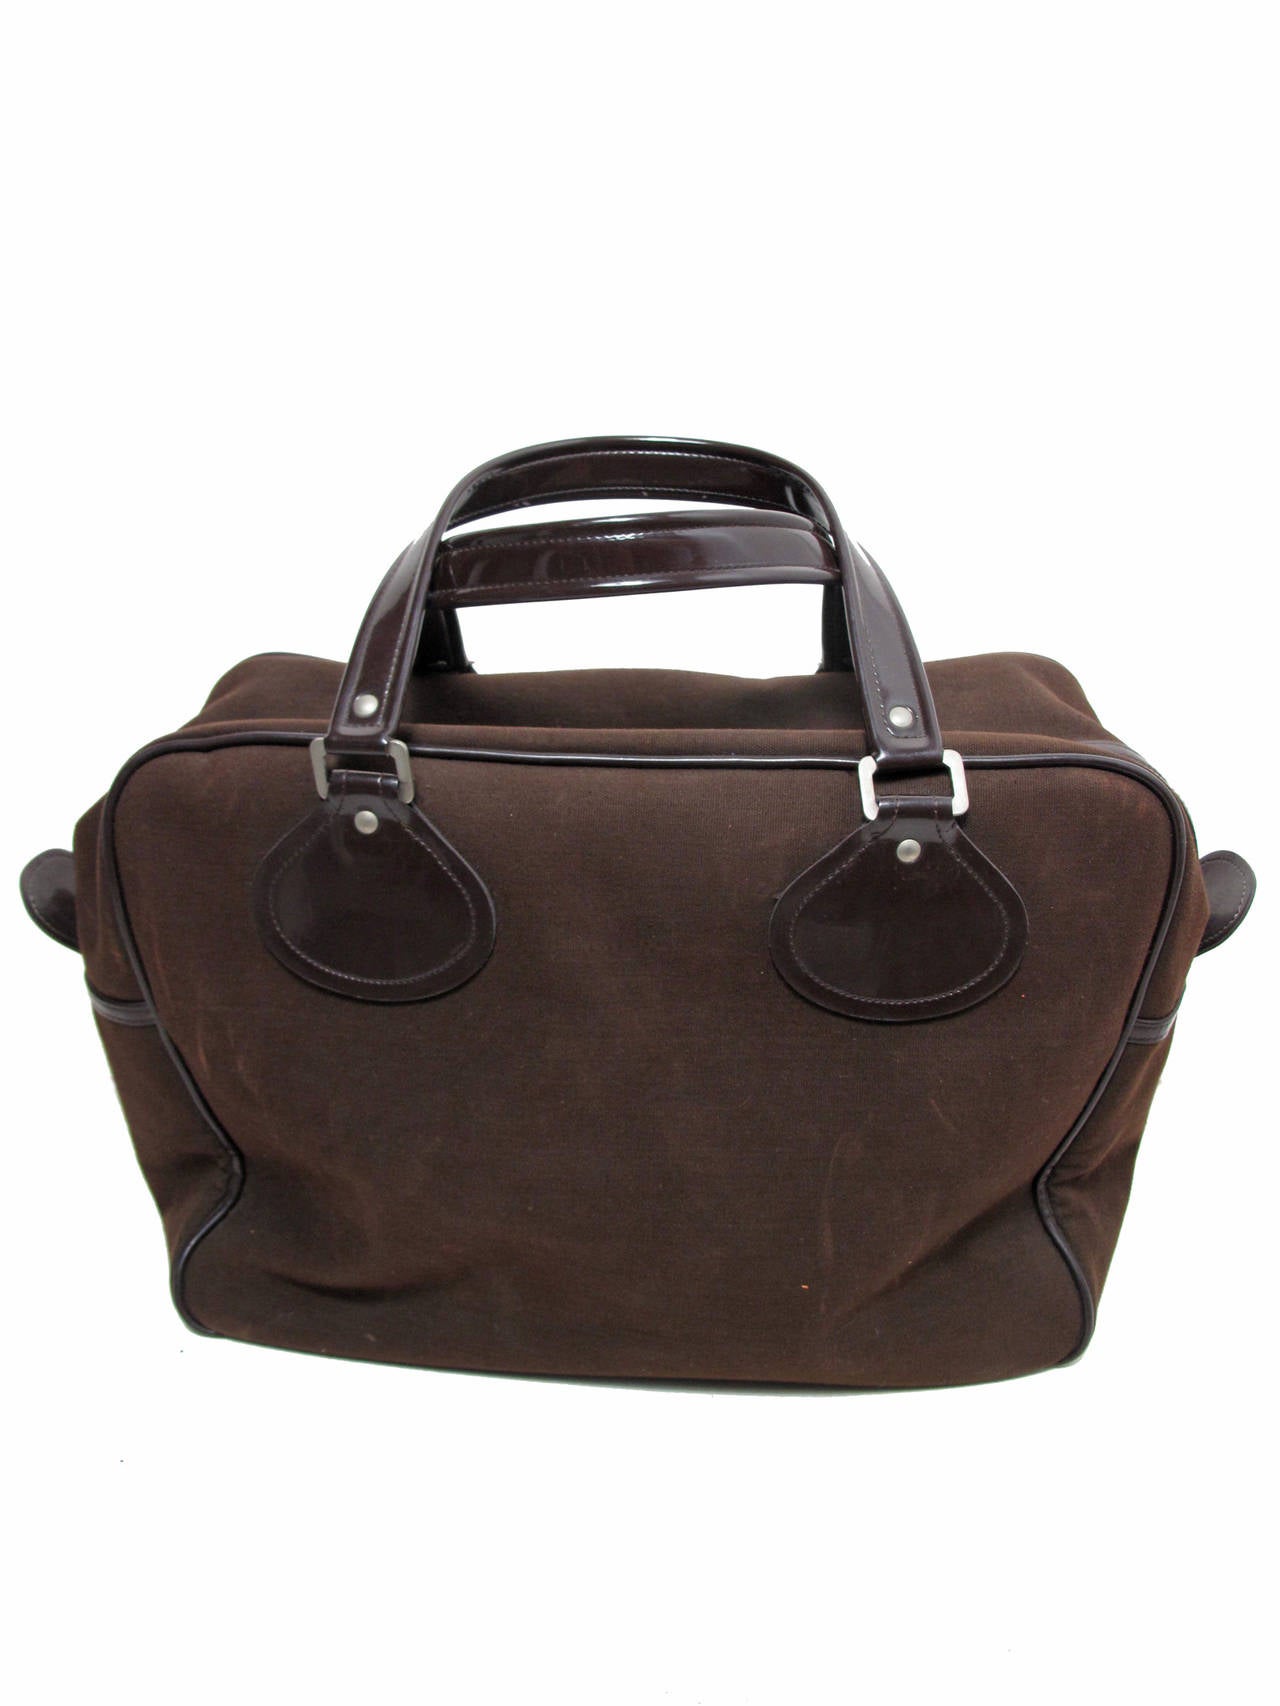 1960s / 70s Courreges Brown Cavas Duffle Bag. Condition: Good, some wear to interior, light wear to exterior. 15